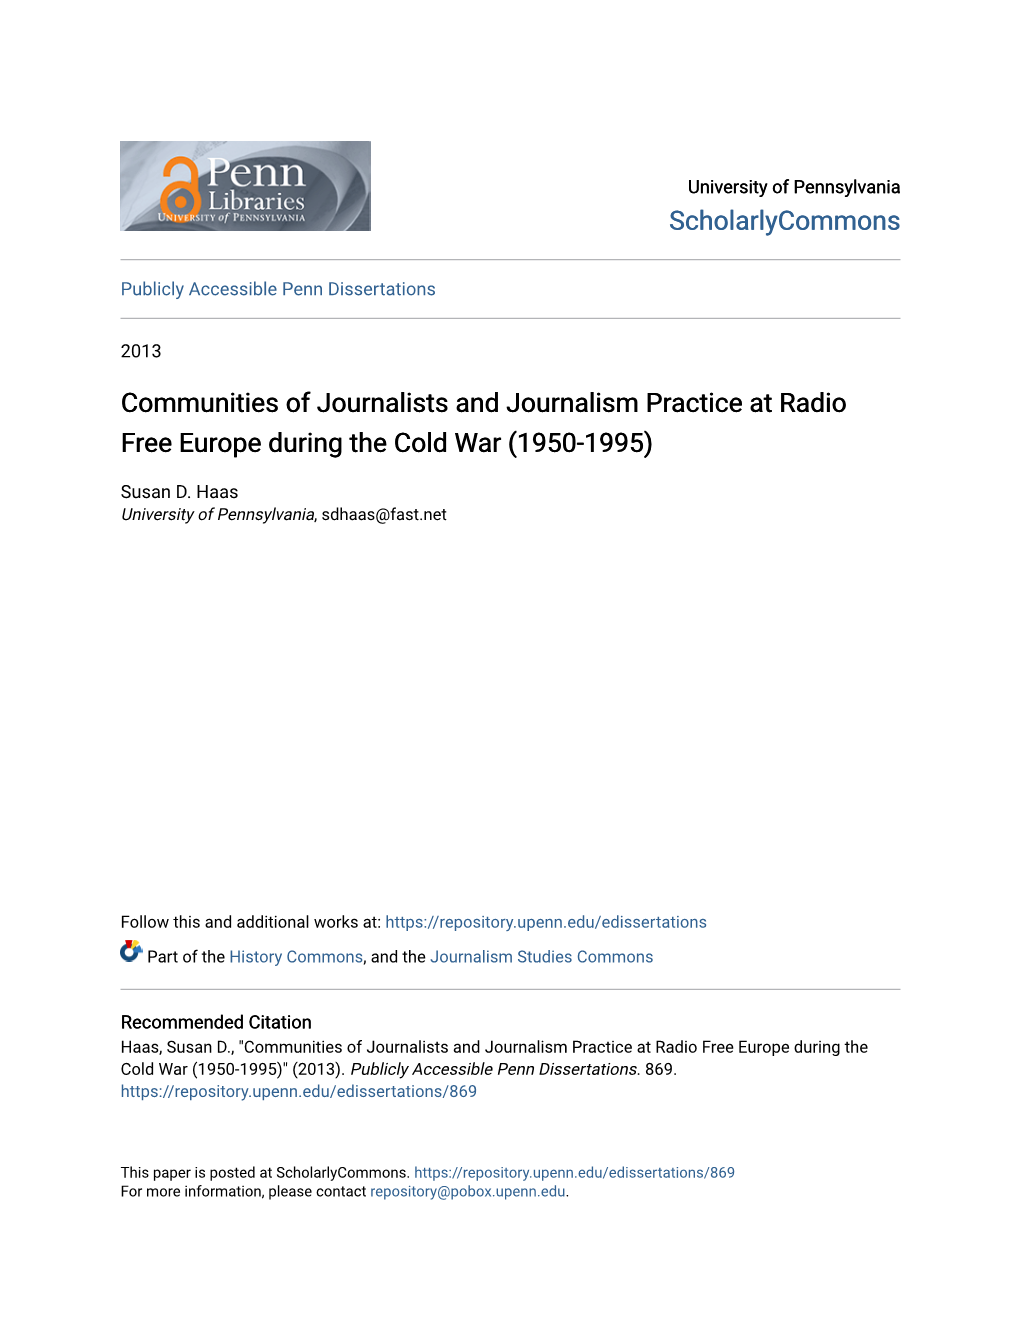 Communities of Journalists and Journalism Practice at Radio Free Europe During the Cold War (1950-1995)